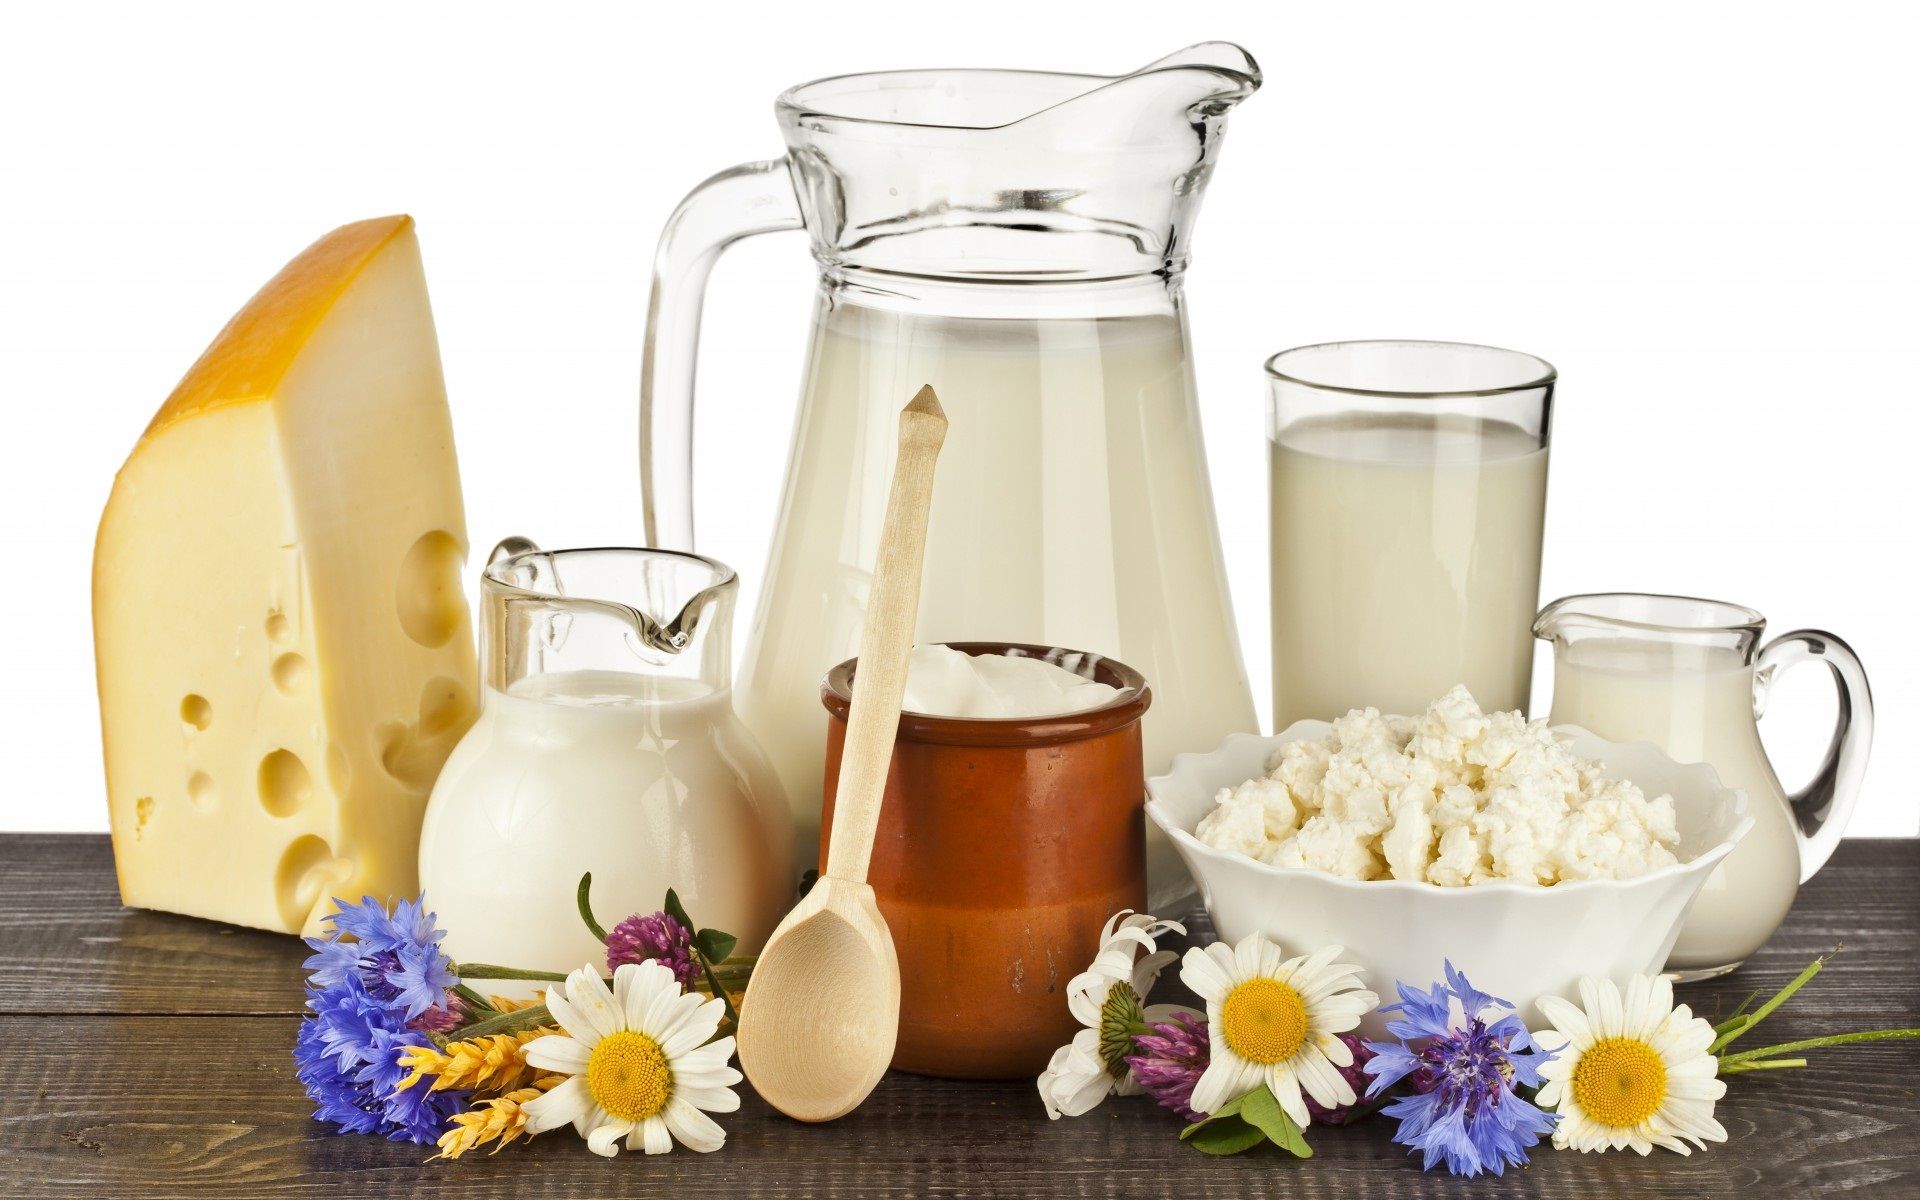 Seven ways your health will benefit by giving up dairy products